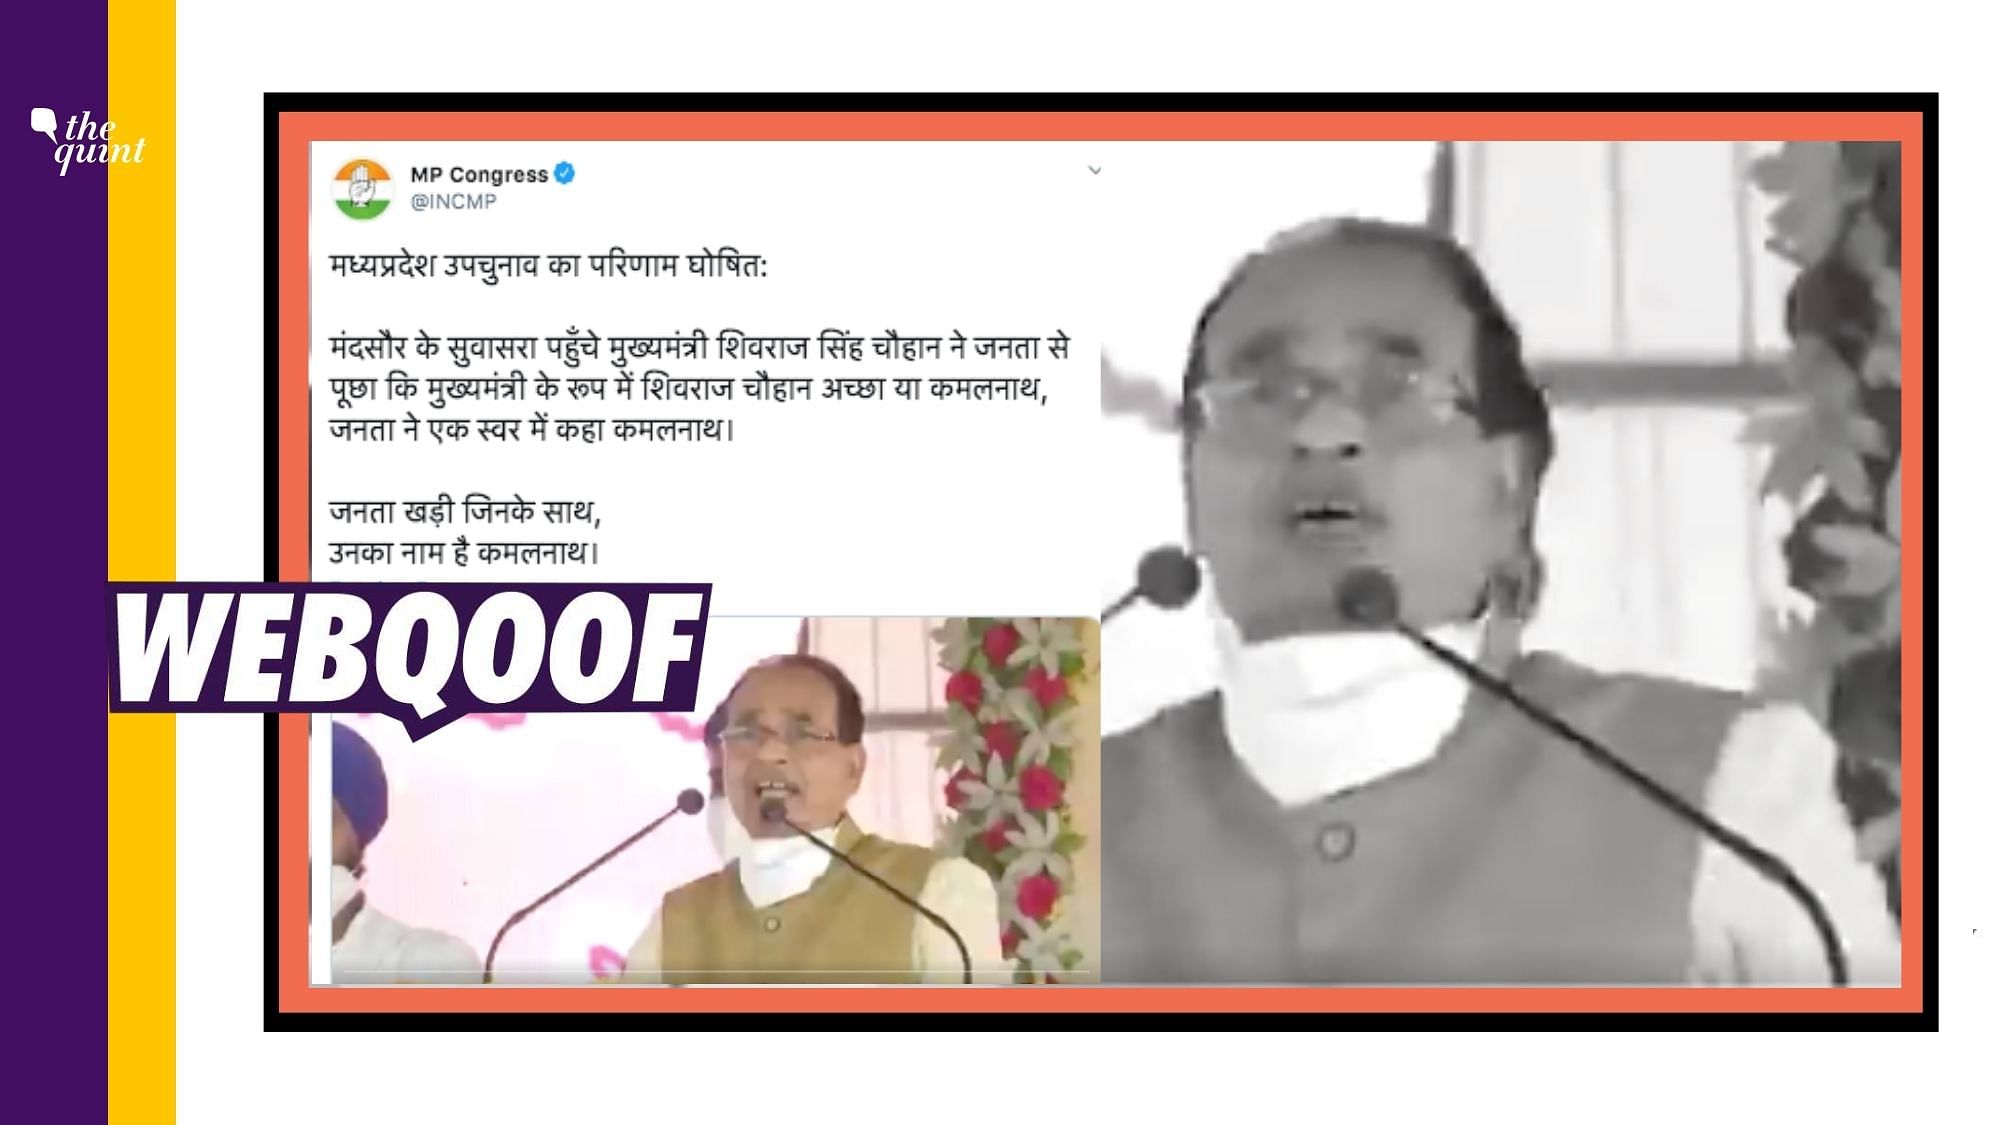  MP Congress shared an edited clip of state Chief Minister Shivraj Singh Chouhan to claim that the public cheered for Kamal Nath and not Chouhan at his rally.